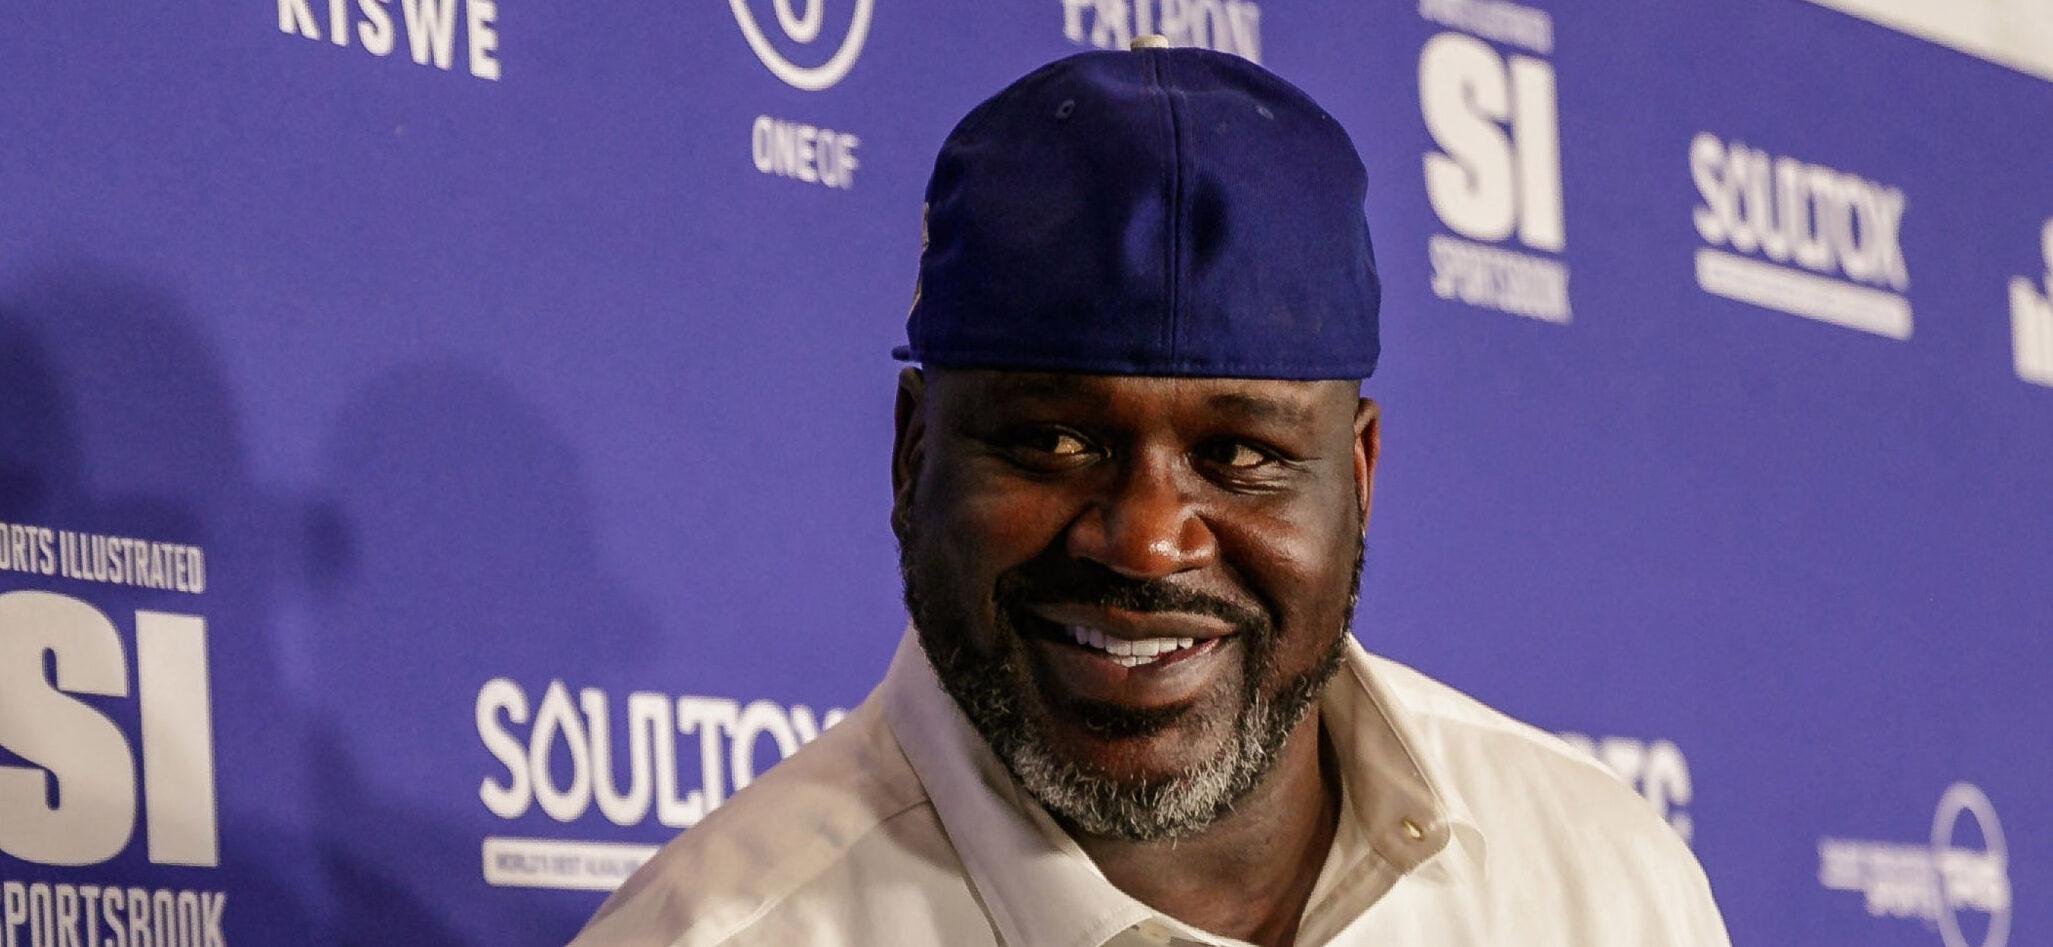 Shaquille O'Neal Says He 'Messed Up' His Relationships With His Exes